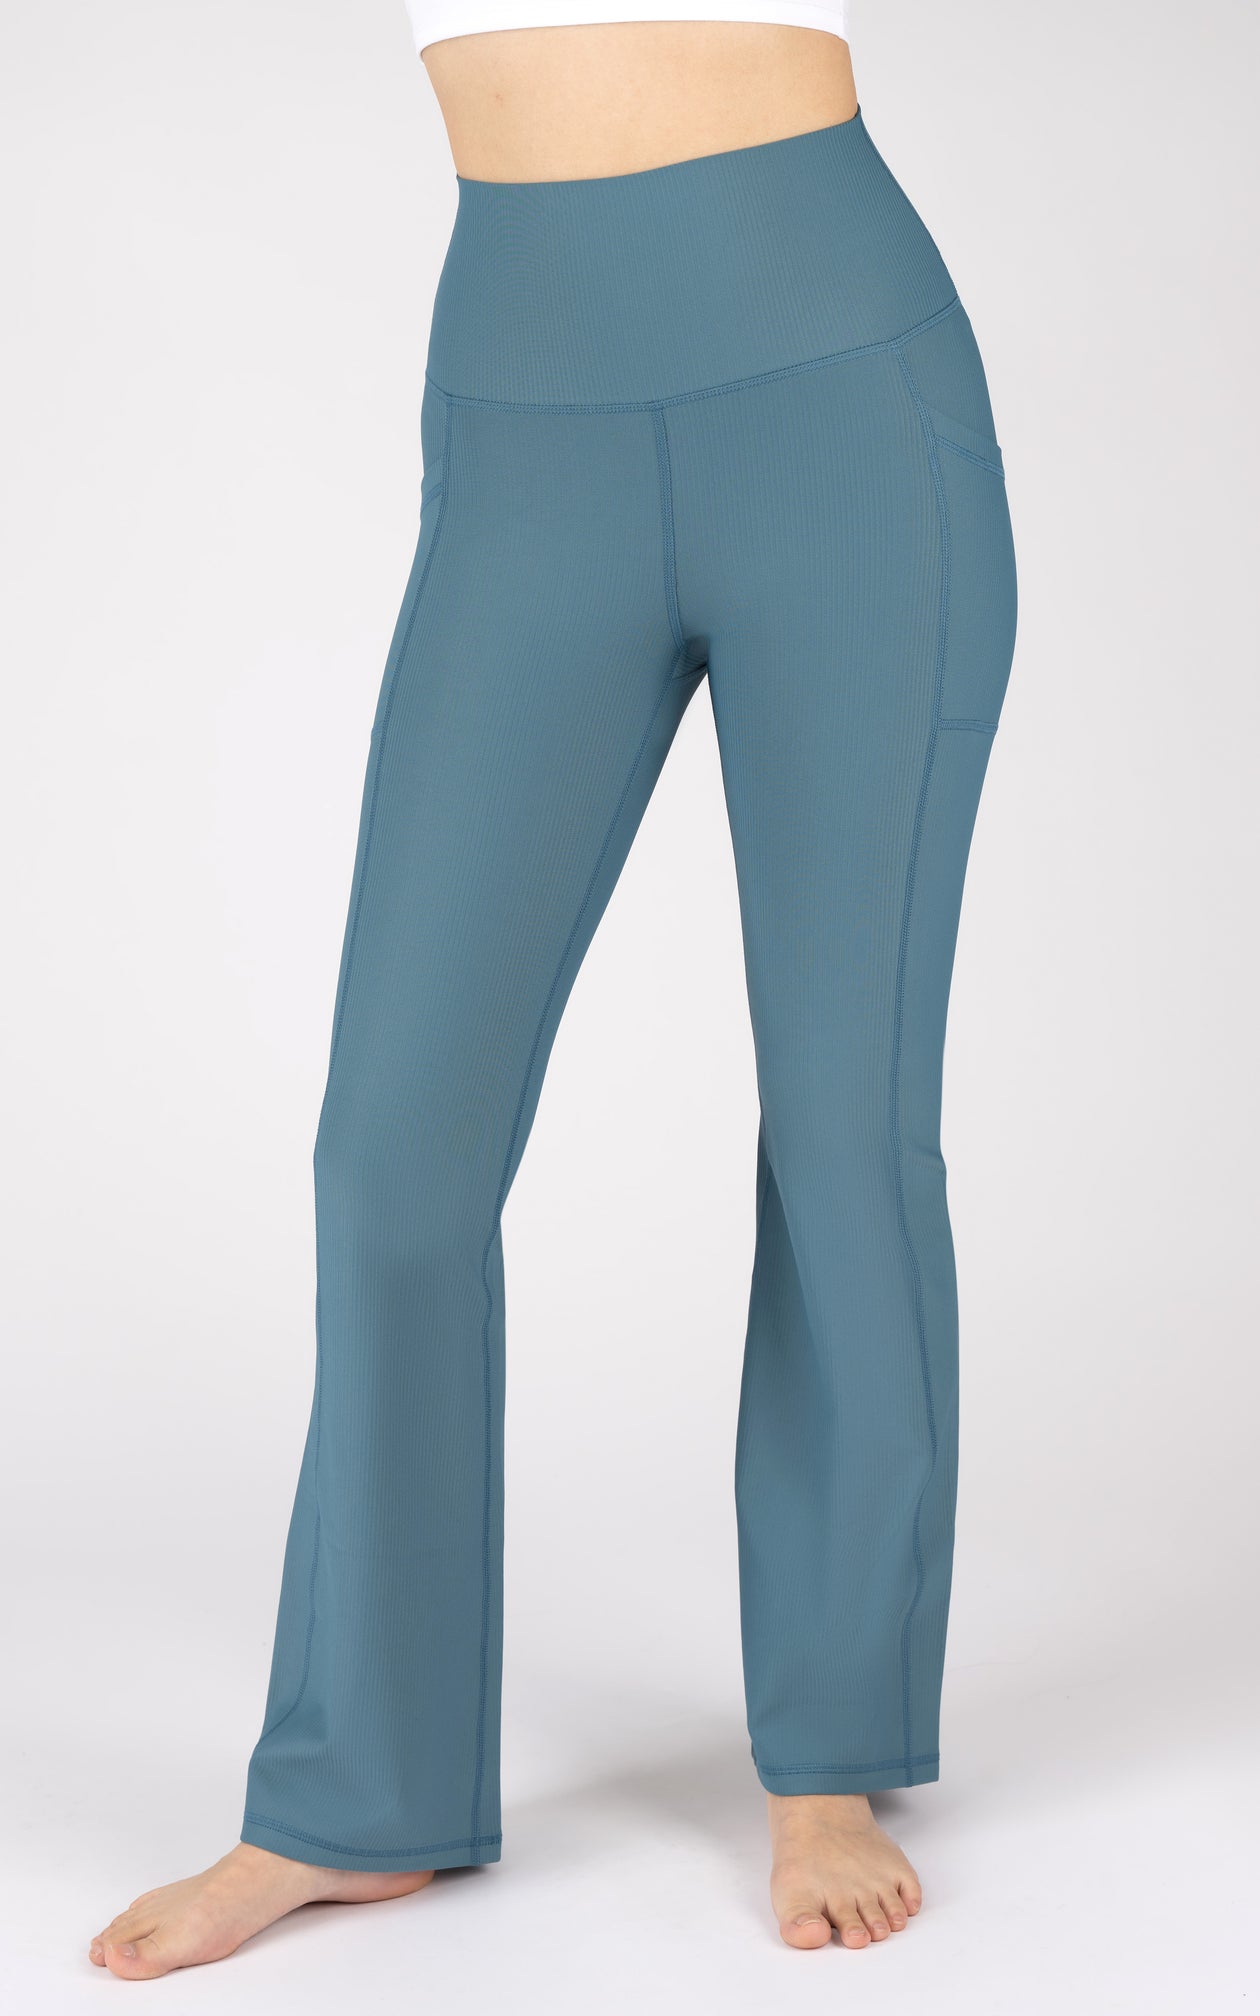 Yogalicious Women's Lux Madison Crossover Flared Leggings Blue Sz. L